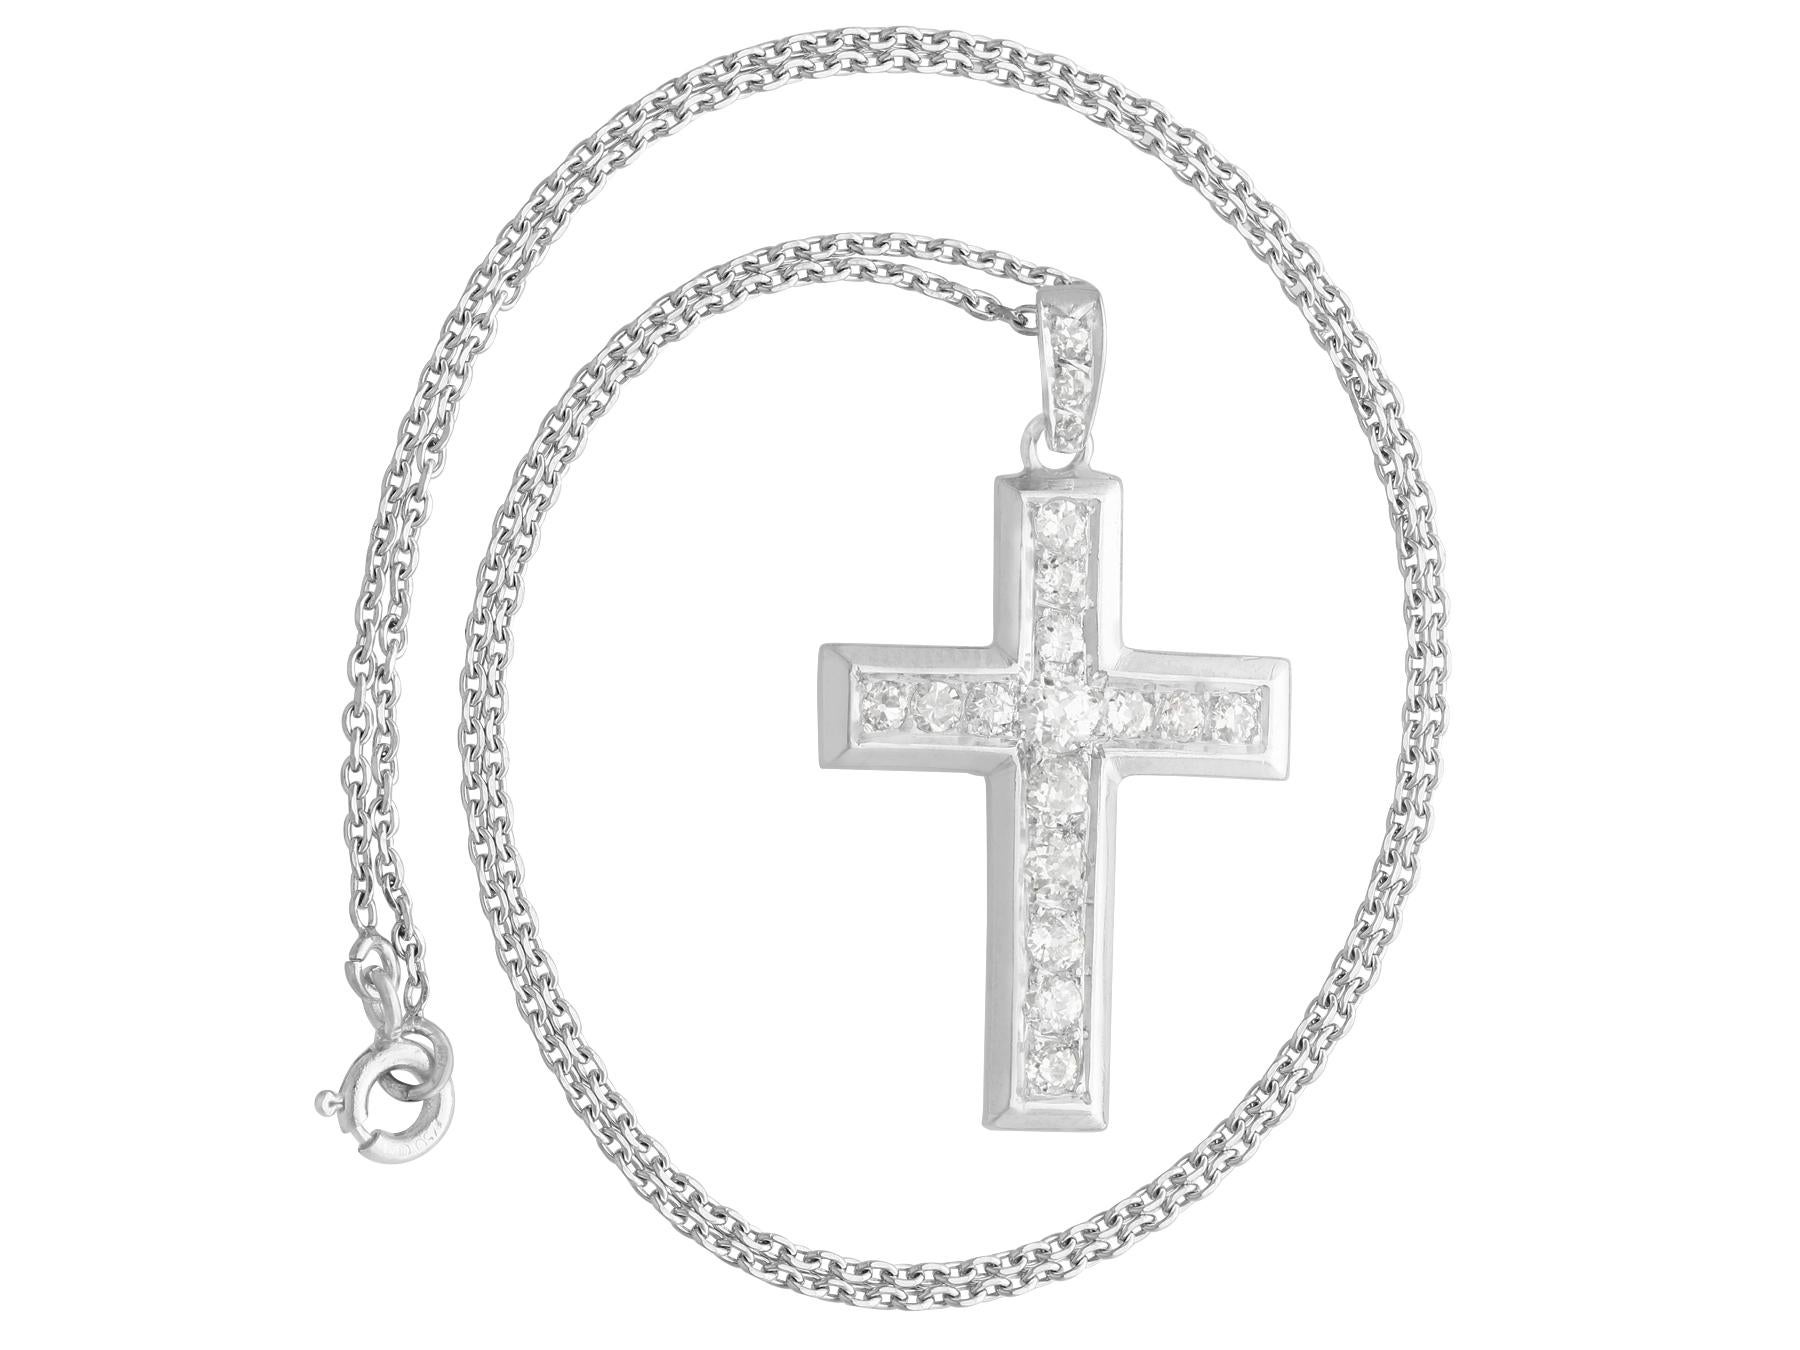 A fine and impressive antique 0.72 carat diamond and 18 karat white gold cross pendant; part of our diverse antique jewelry collections.

This fine and impressive antique pendant has been crafted in 18k white gold.

The stunning cross design is